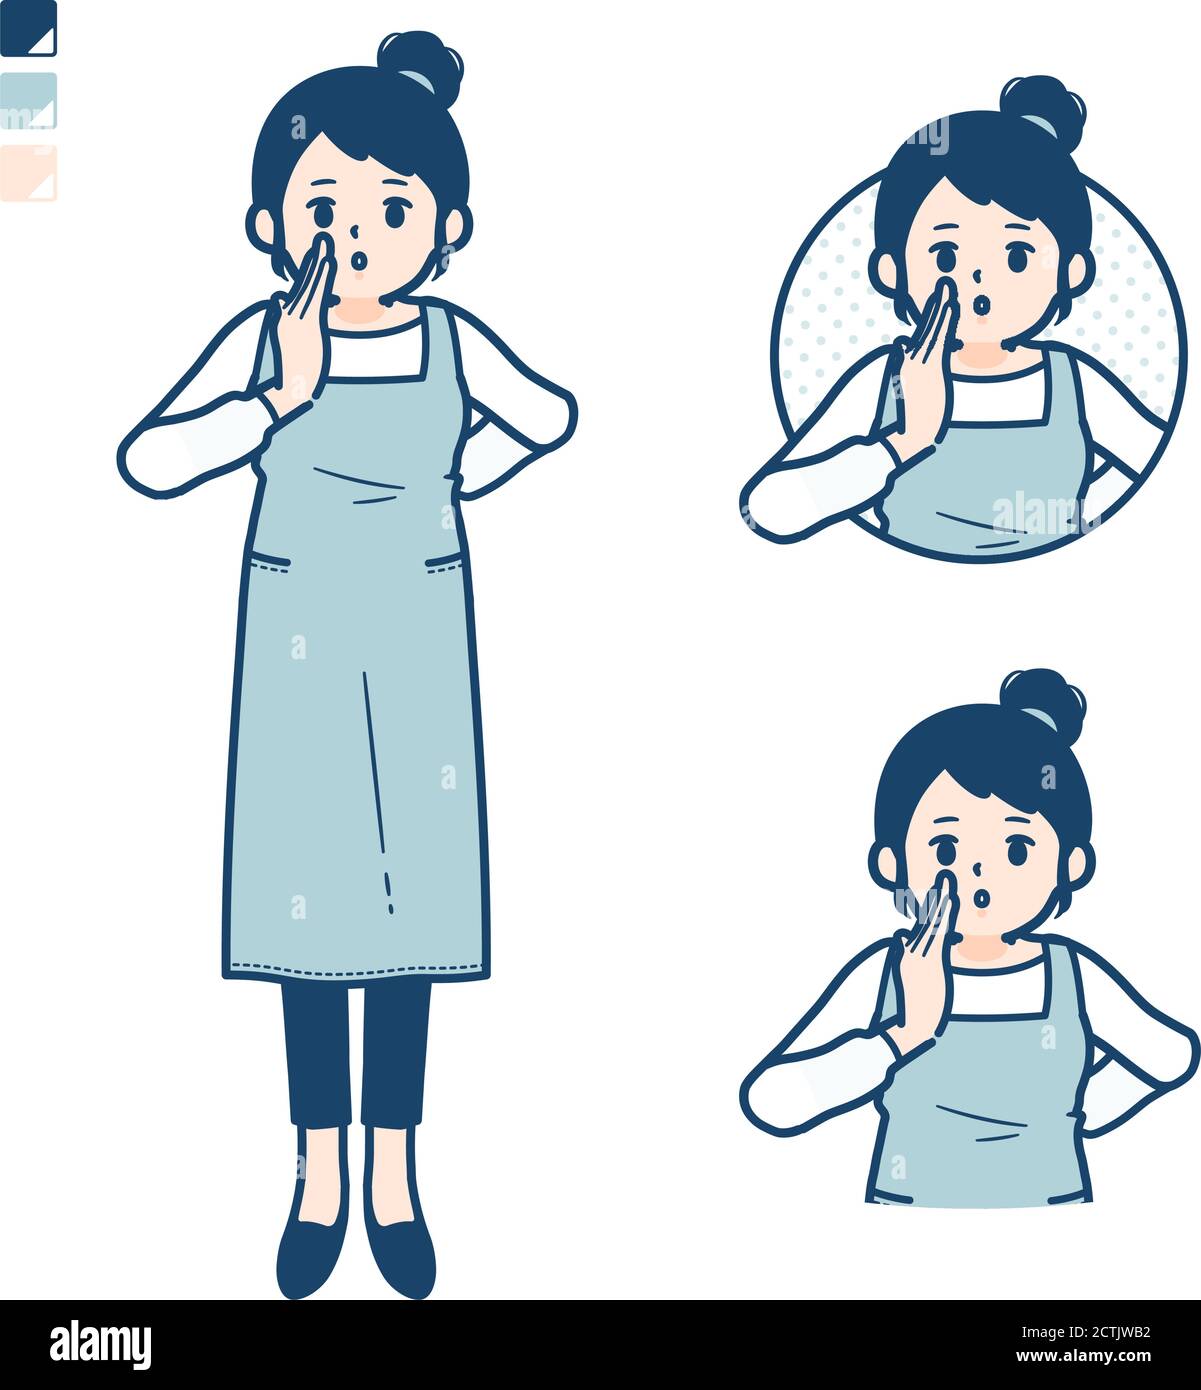 A woman in a apron with Whispering images. It's vector art so it's easy to edit. Stock Vector